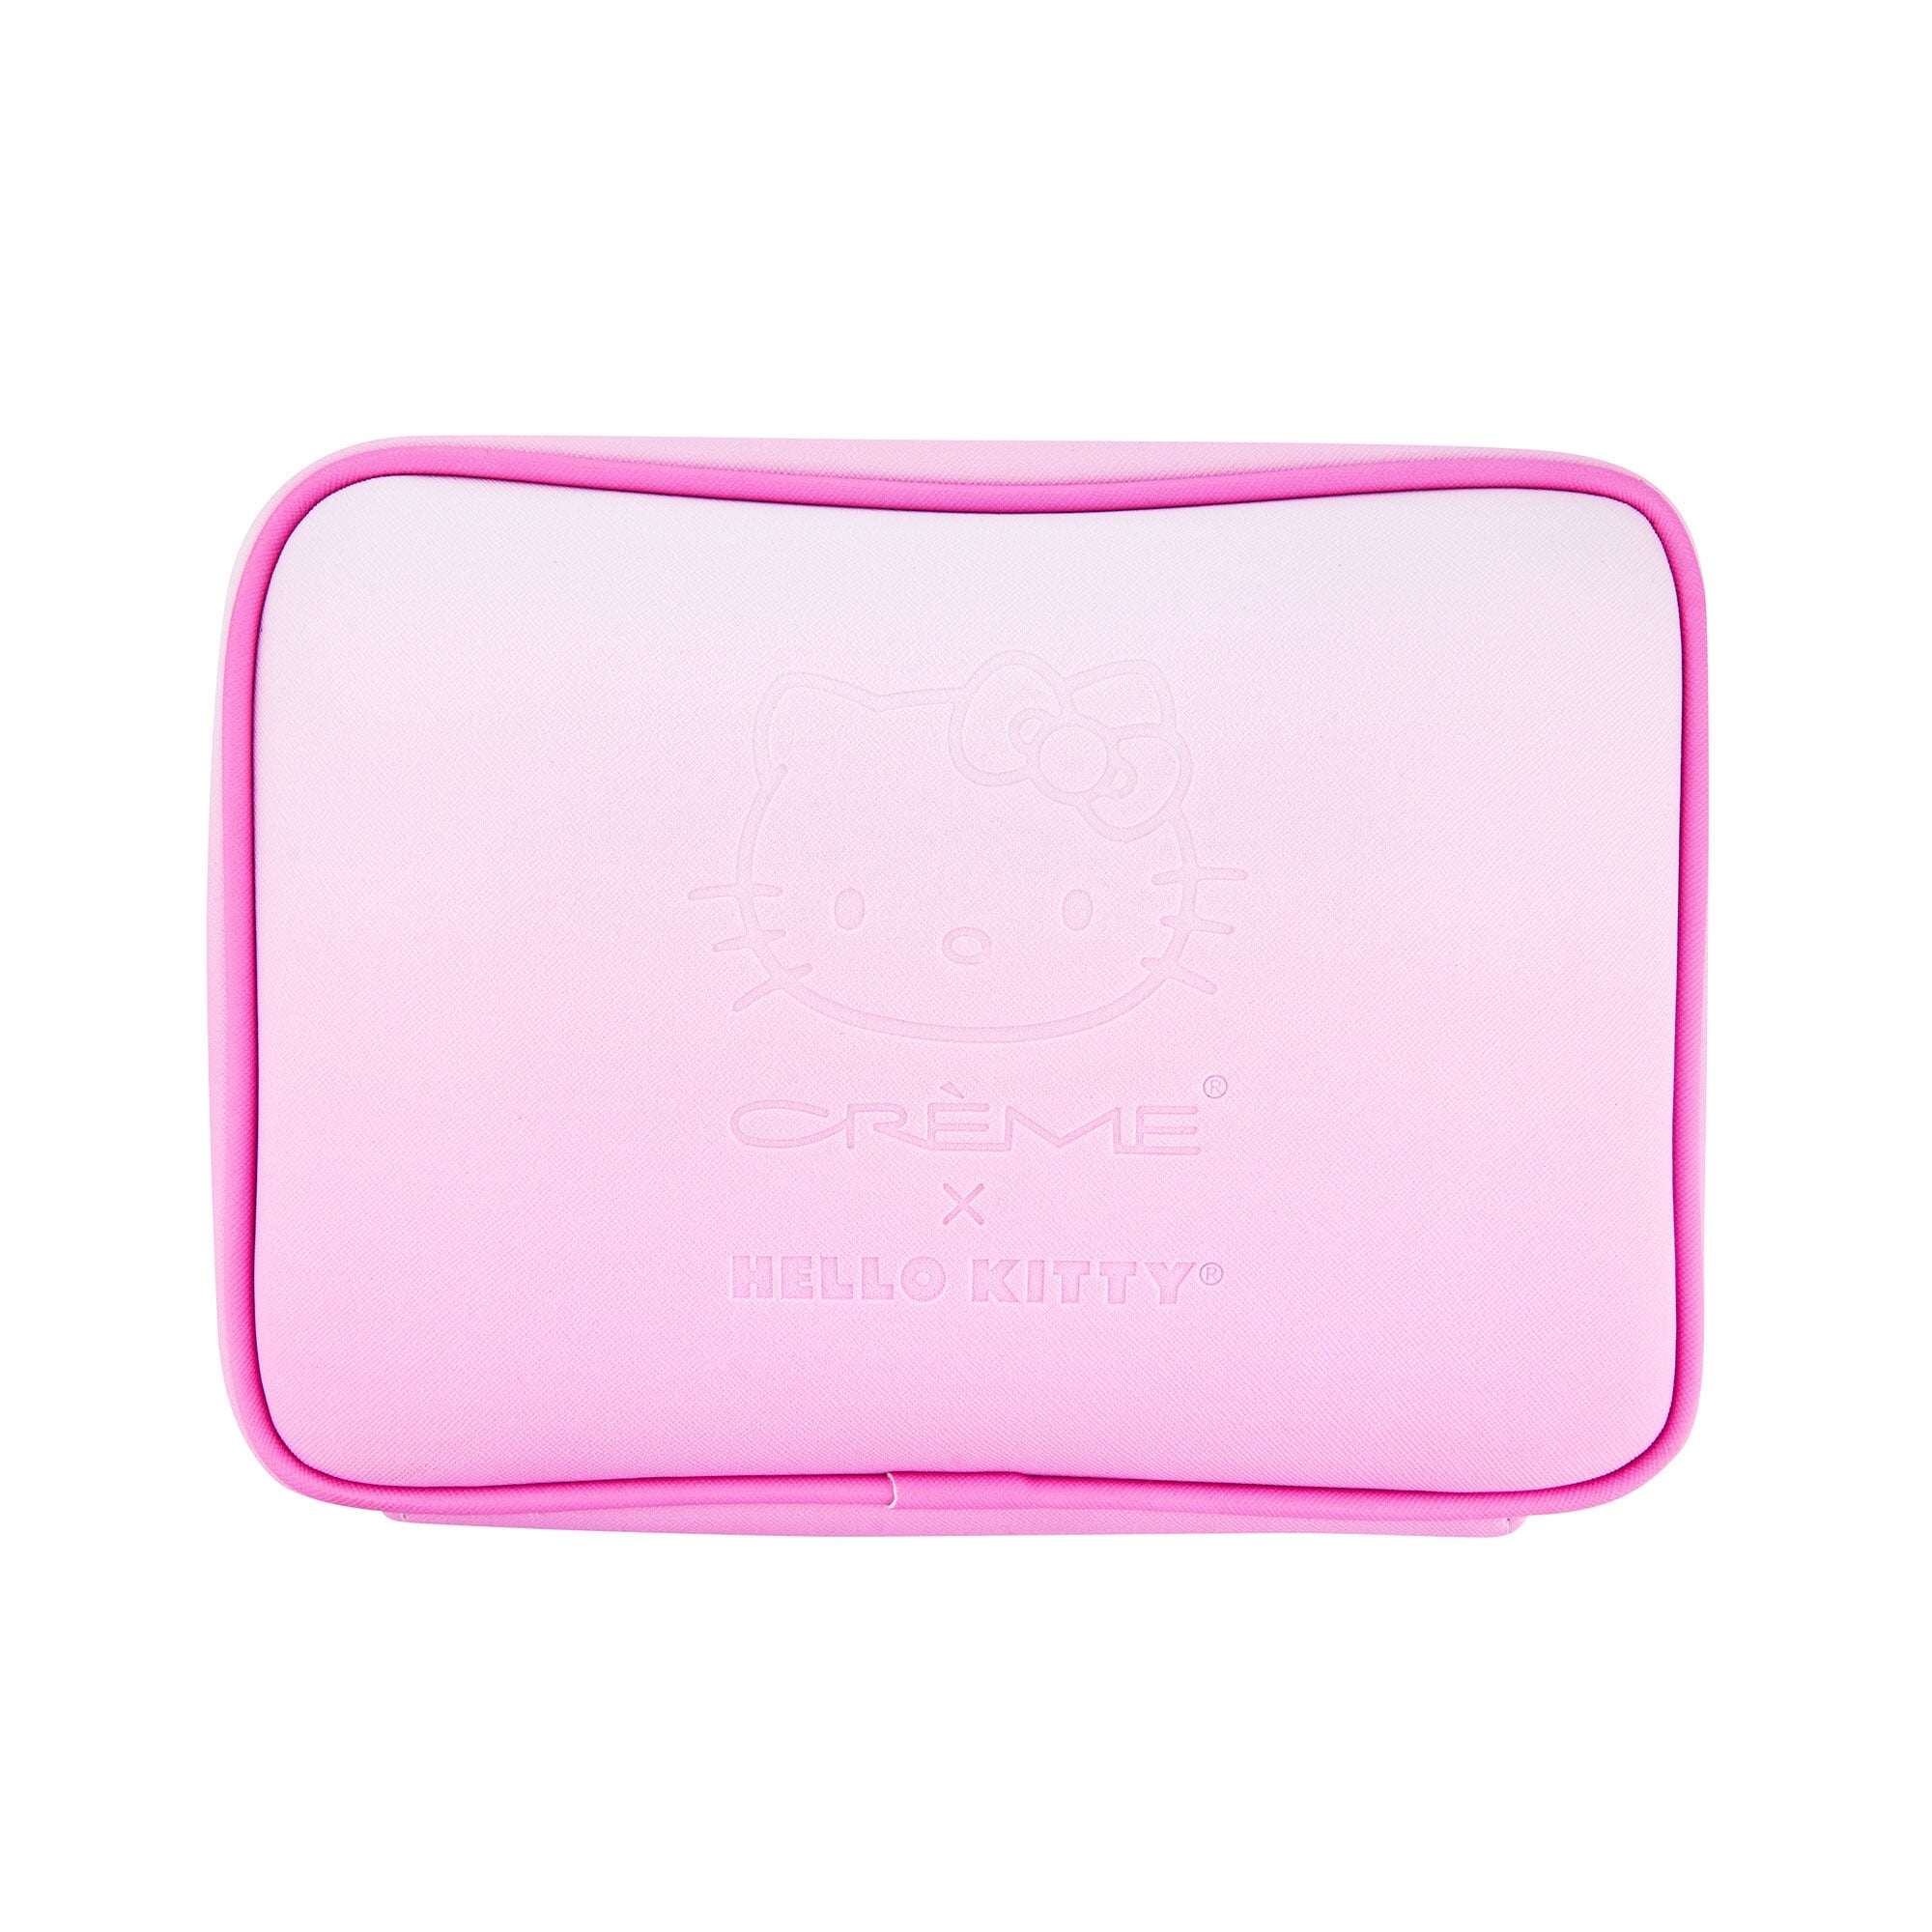 Hello Kitty Perfect Pink Travel Case – The Crème Shop